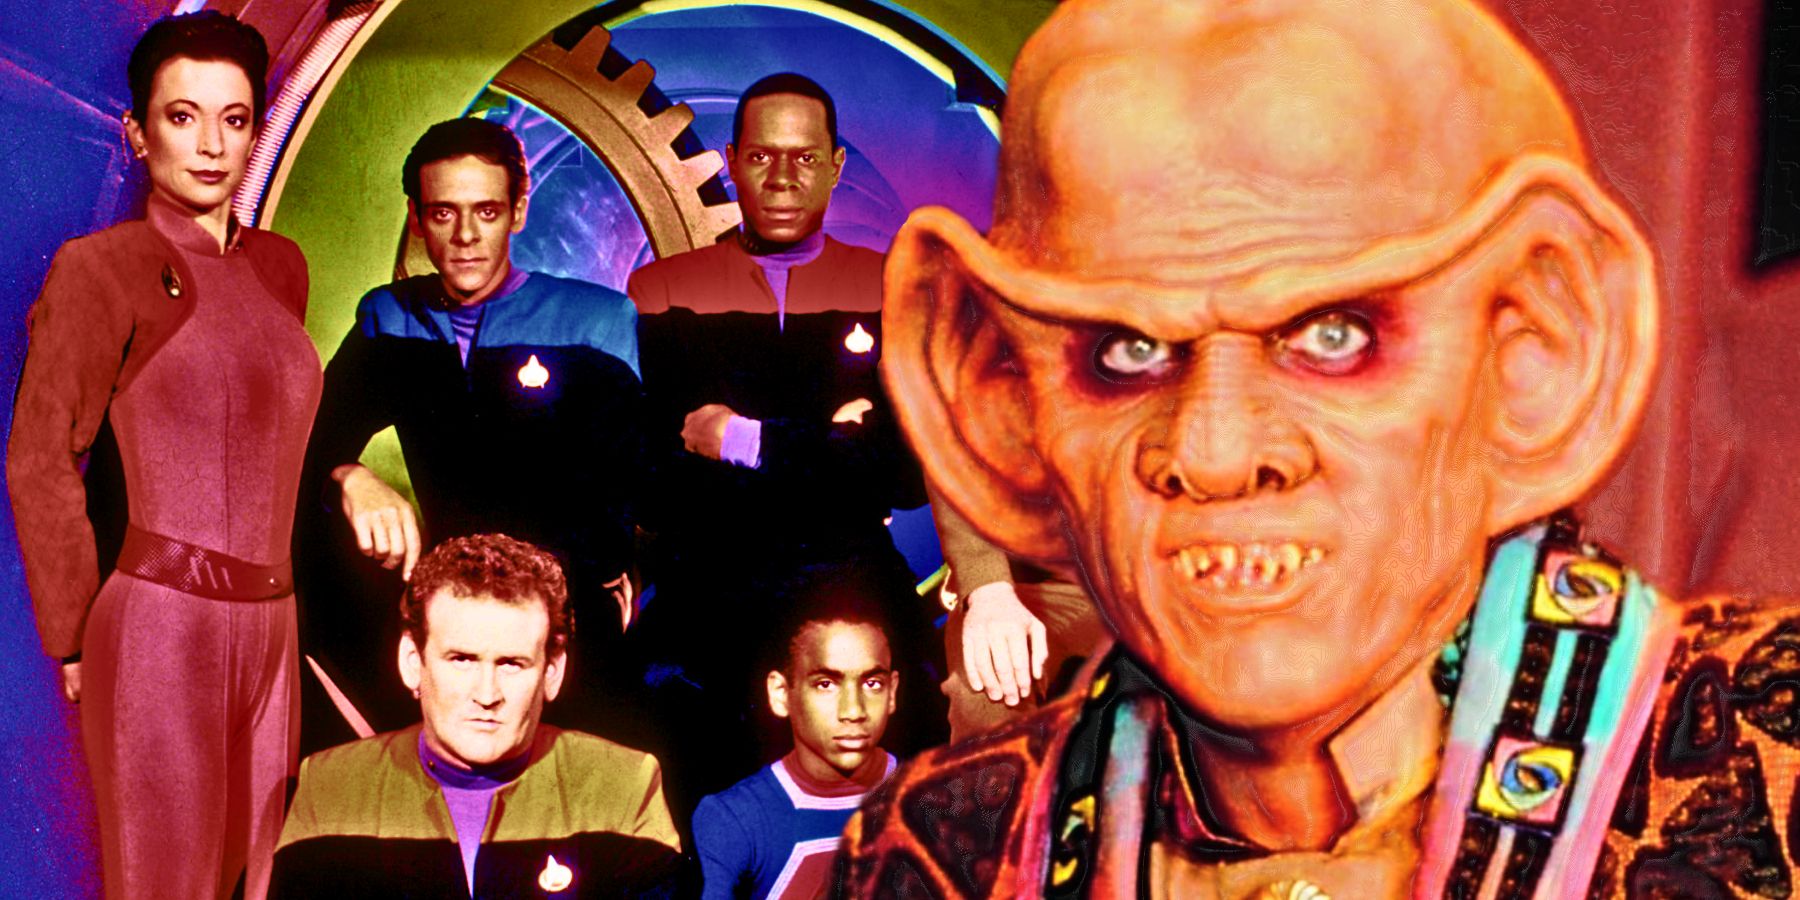 The cast of DS9 season 1 and Armin Shimerman as Quark